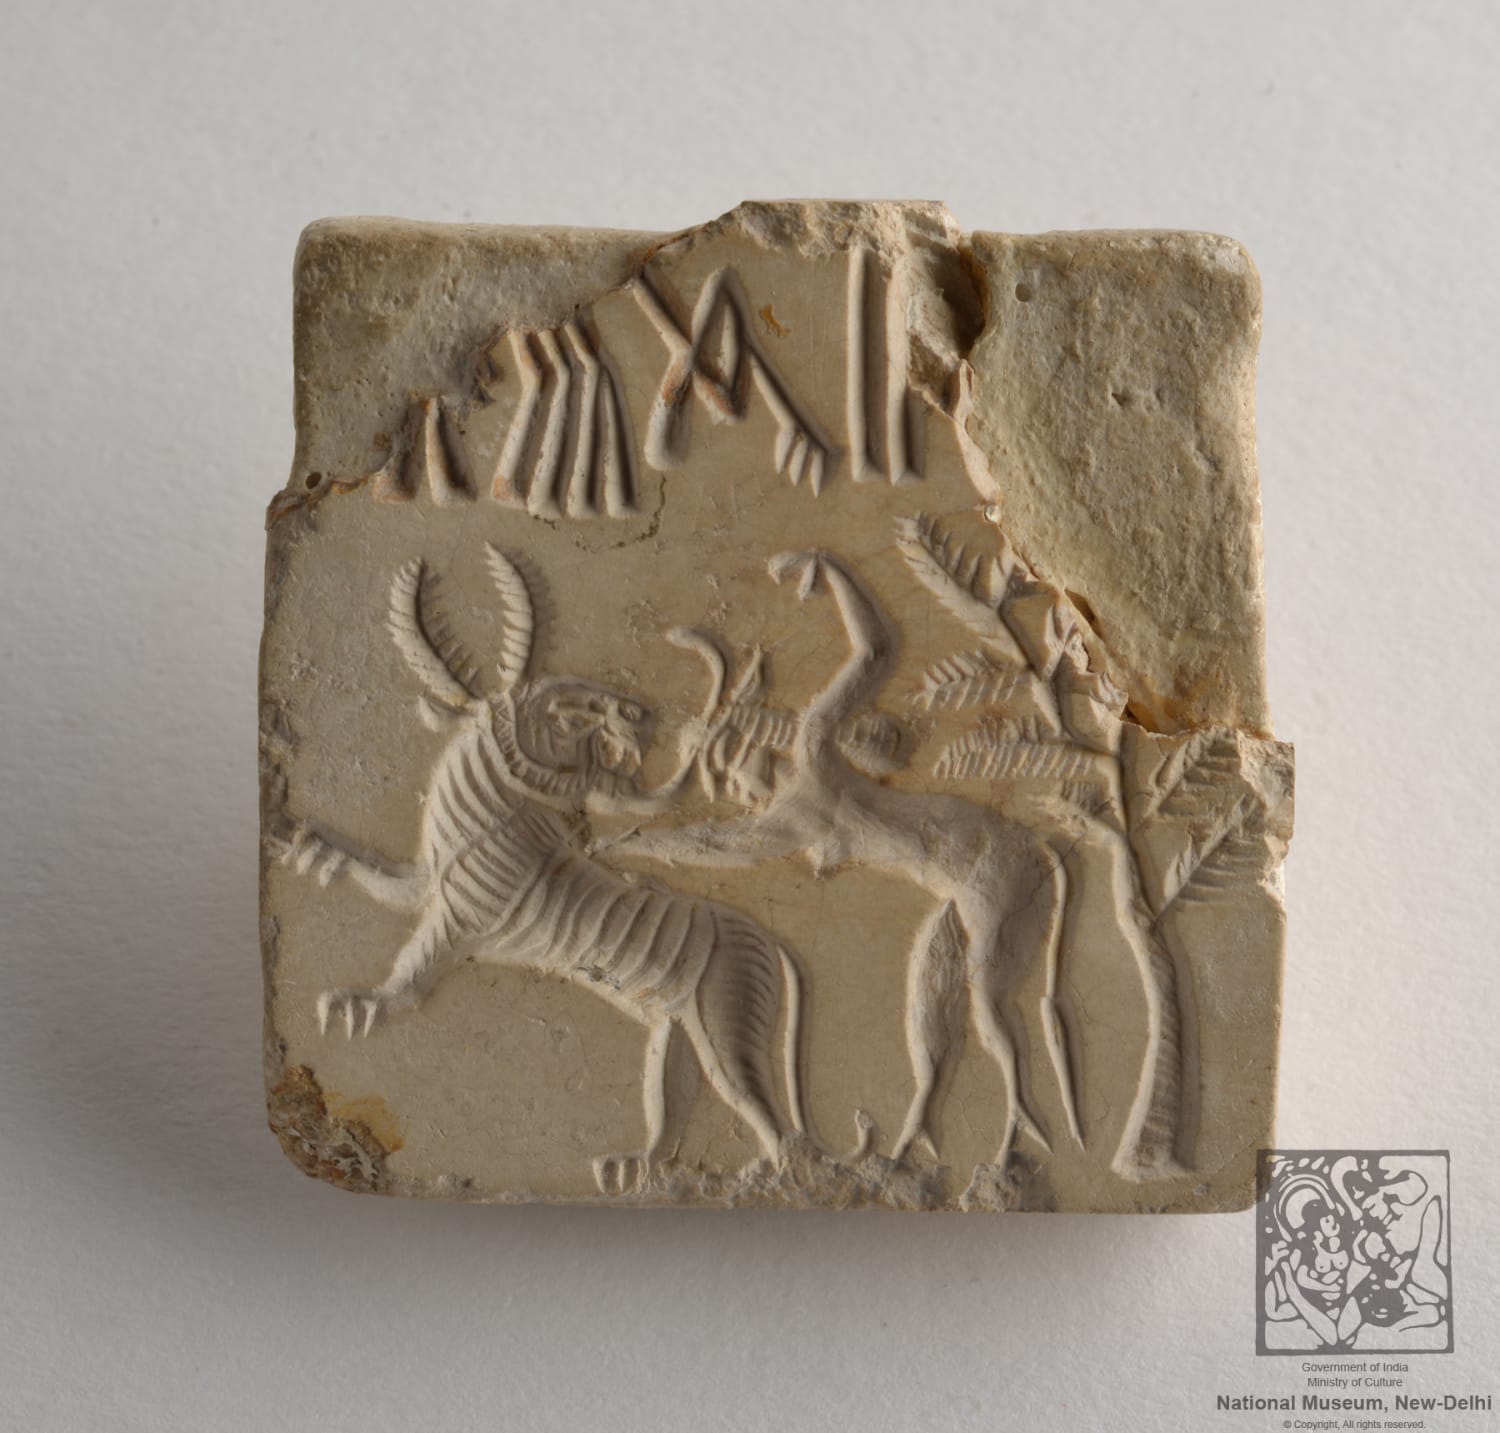 Seal showing a human fighting tiger including tree and four pictograms, 2500-2000 BCE, Mohenjodaro, Indus Valley Civilization, National Museum, New Delhi, India.